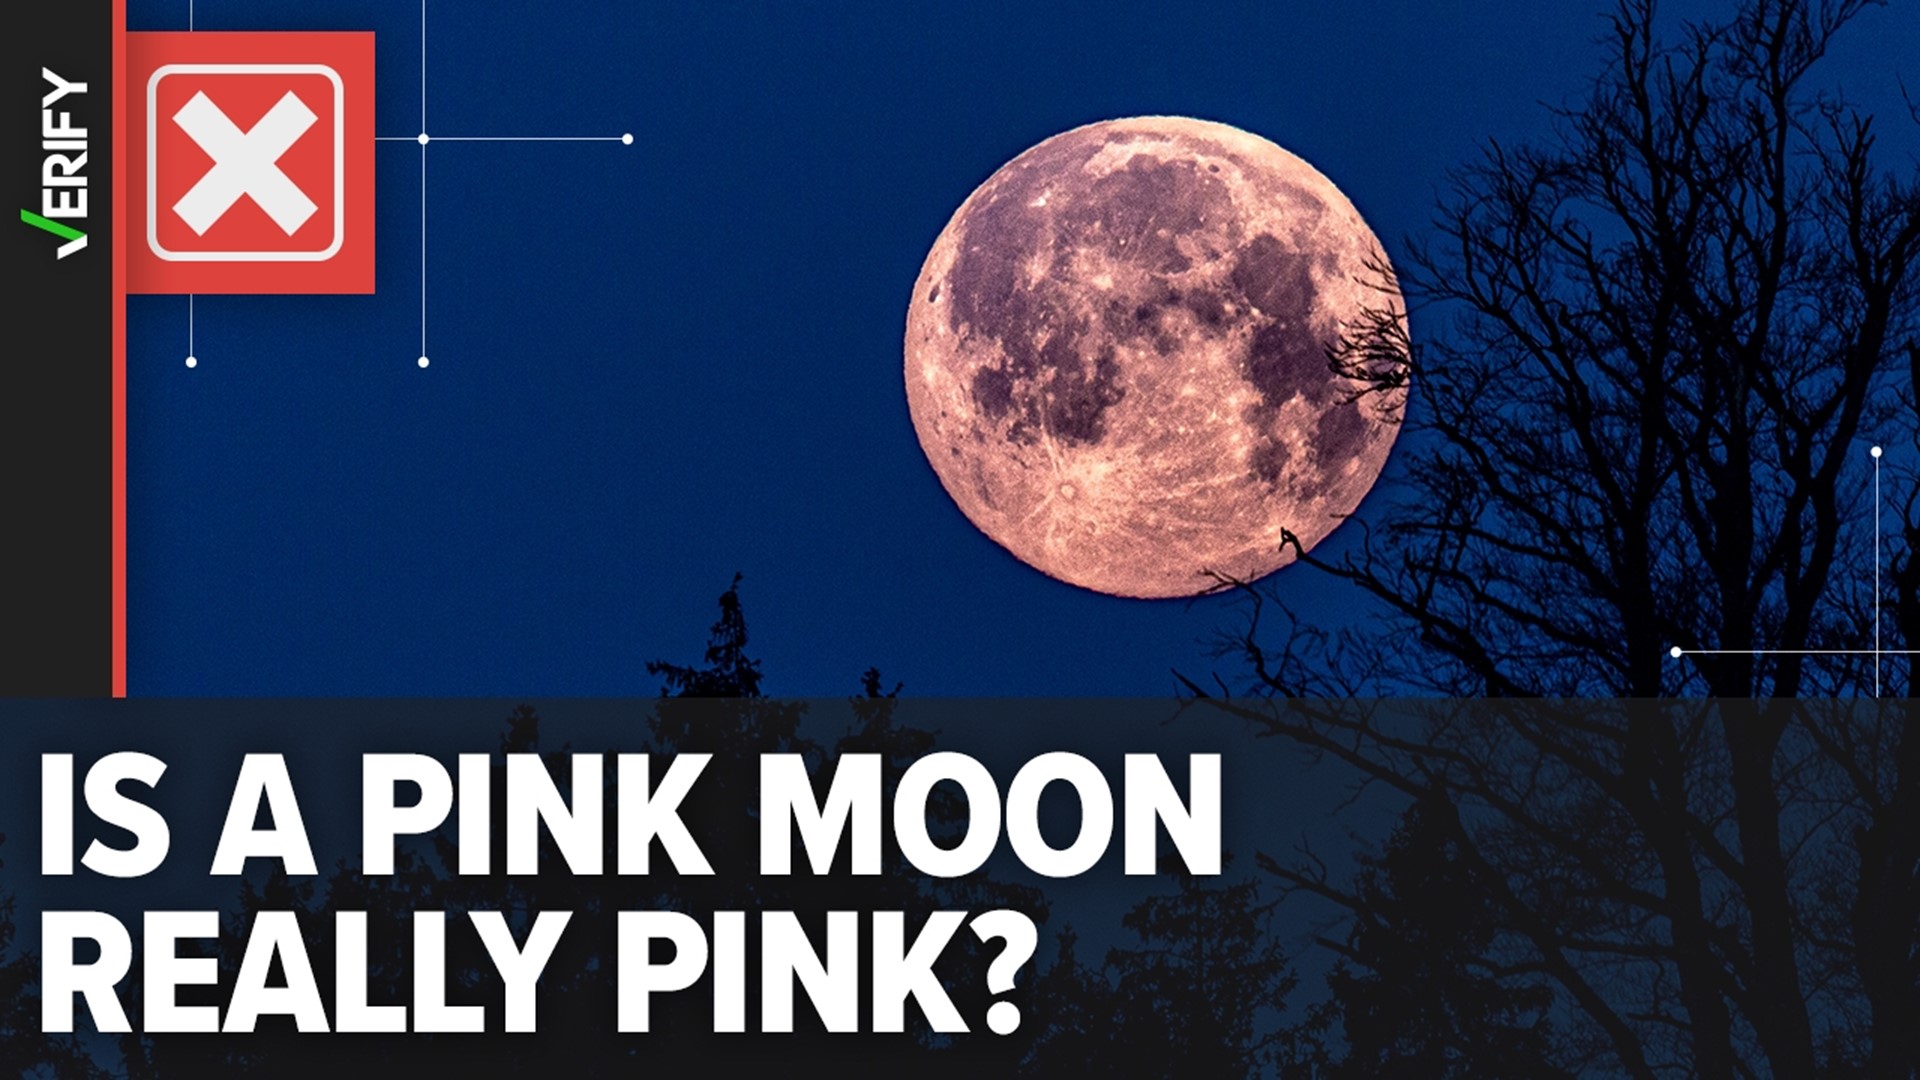 Pink moon does not actually look pink